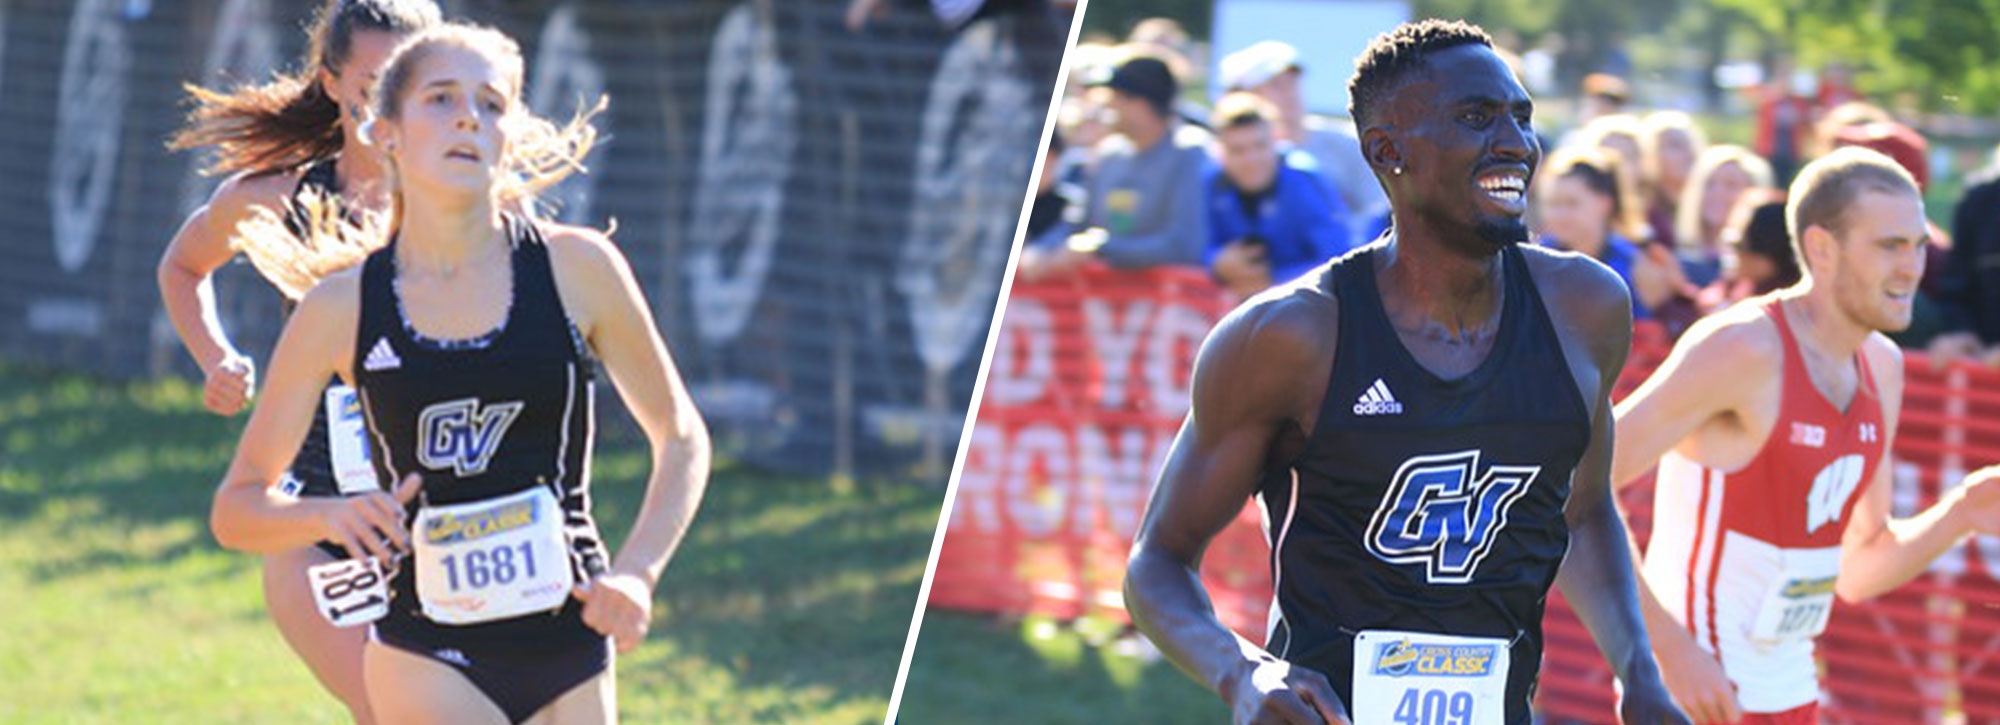 GVSU Sweeps GLIAC Cross Country Athlete of the Week Honors at Greater Louisville Classic